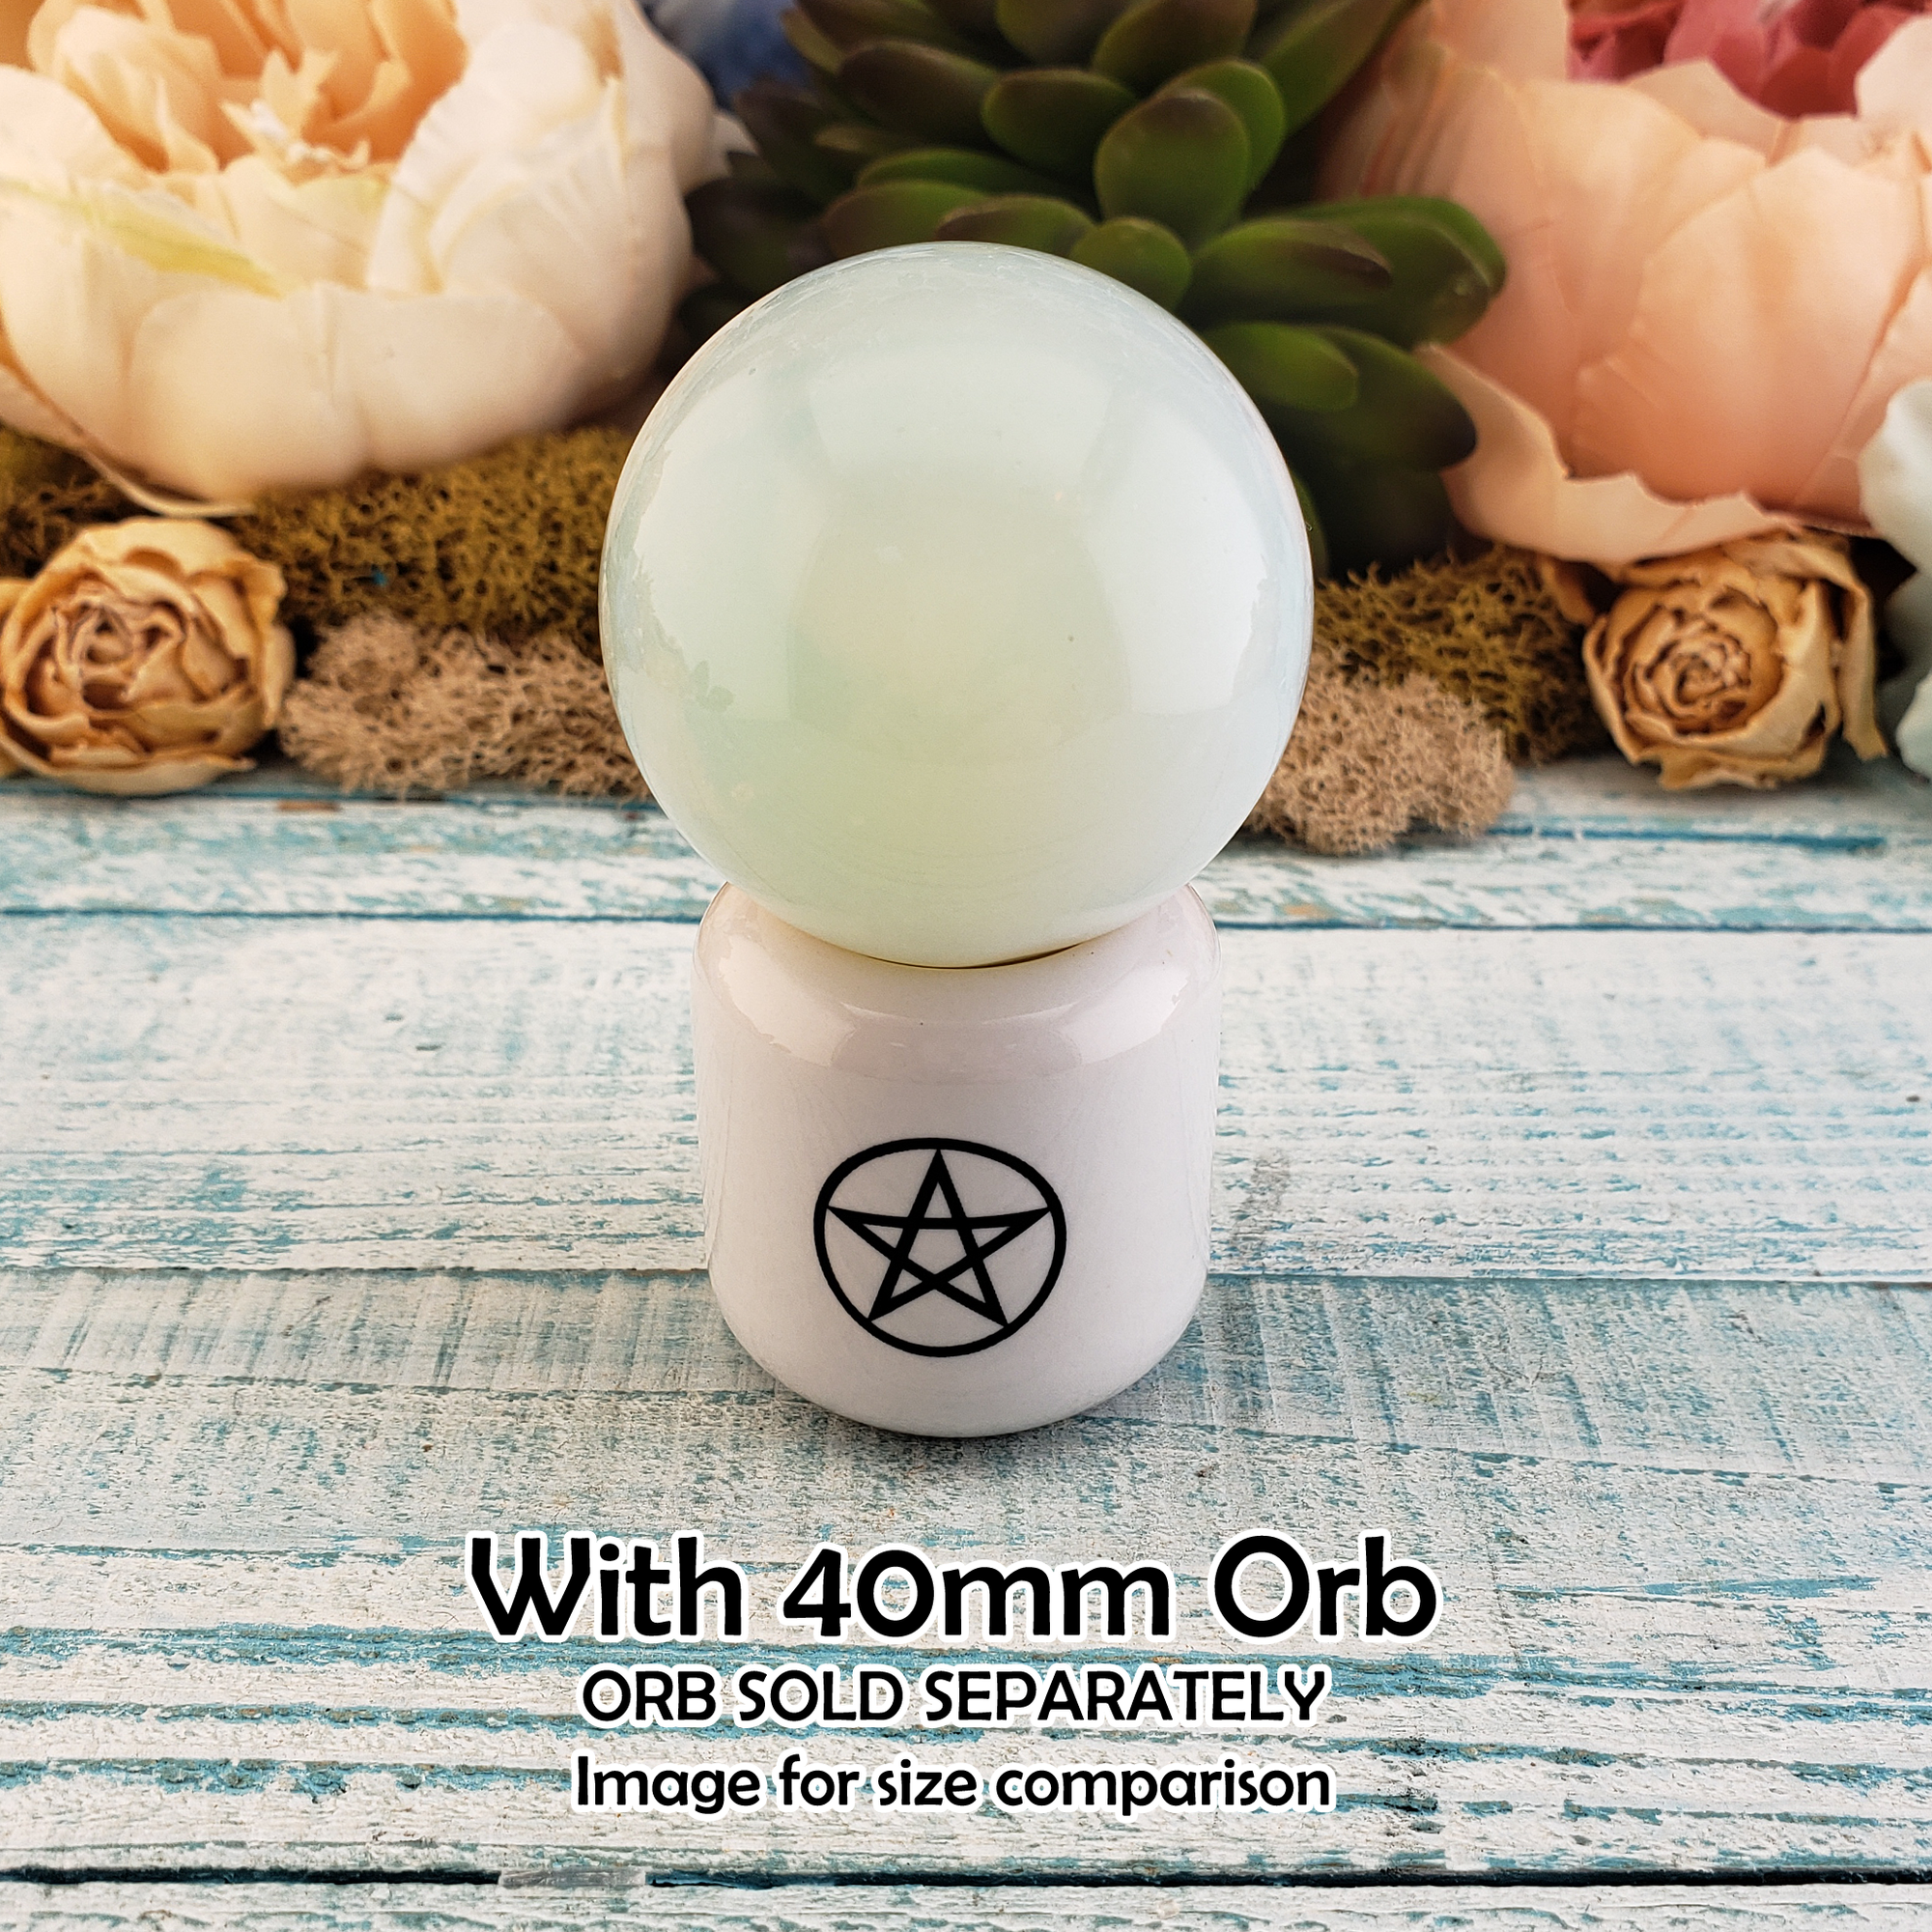 White Pentacle Ceramic Sphere Stand - Chime Candle Holder - Incense Holder - with 40mm Crystal Sphere for Size Comparison